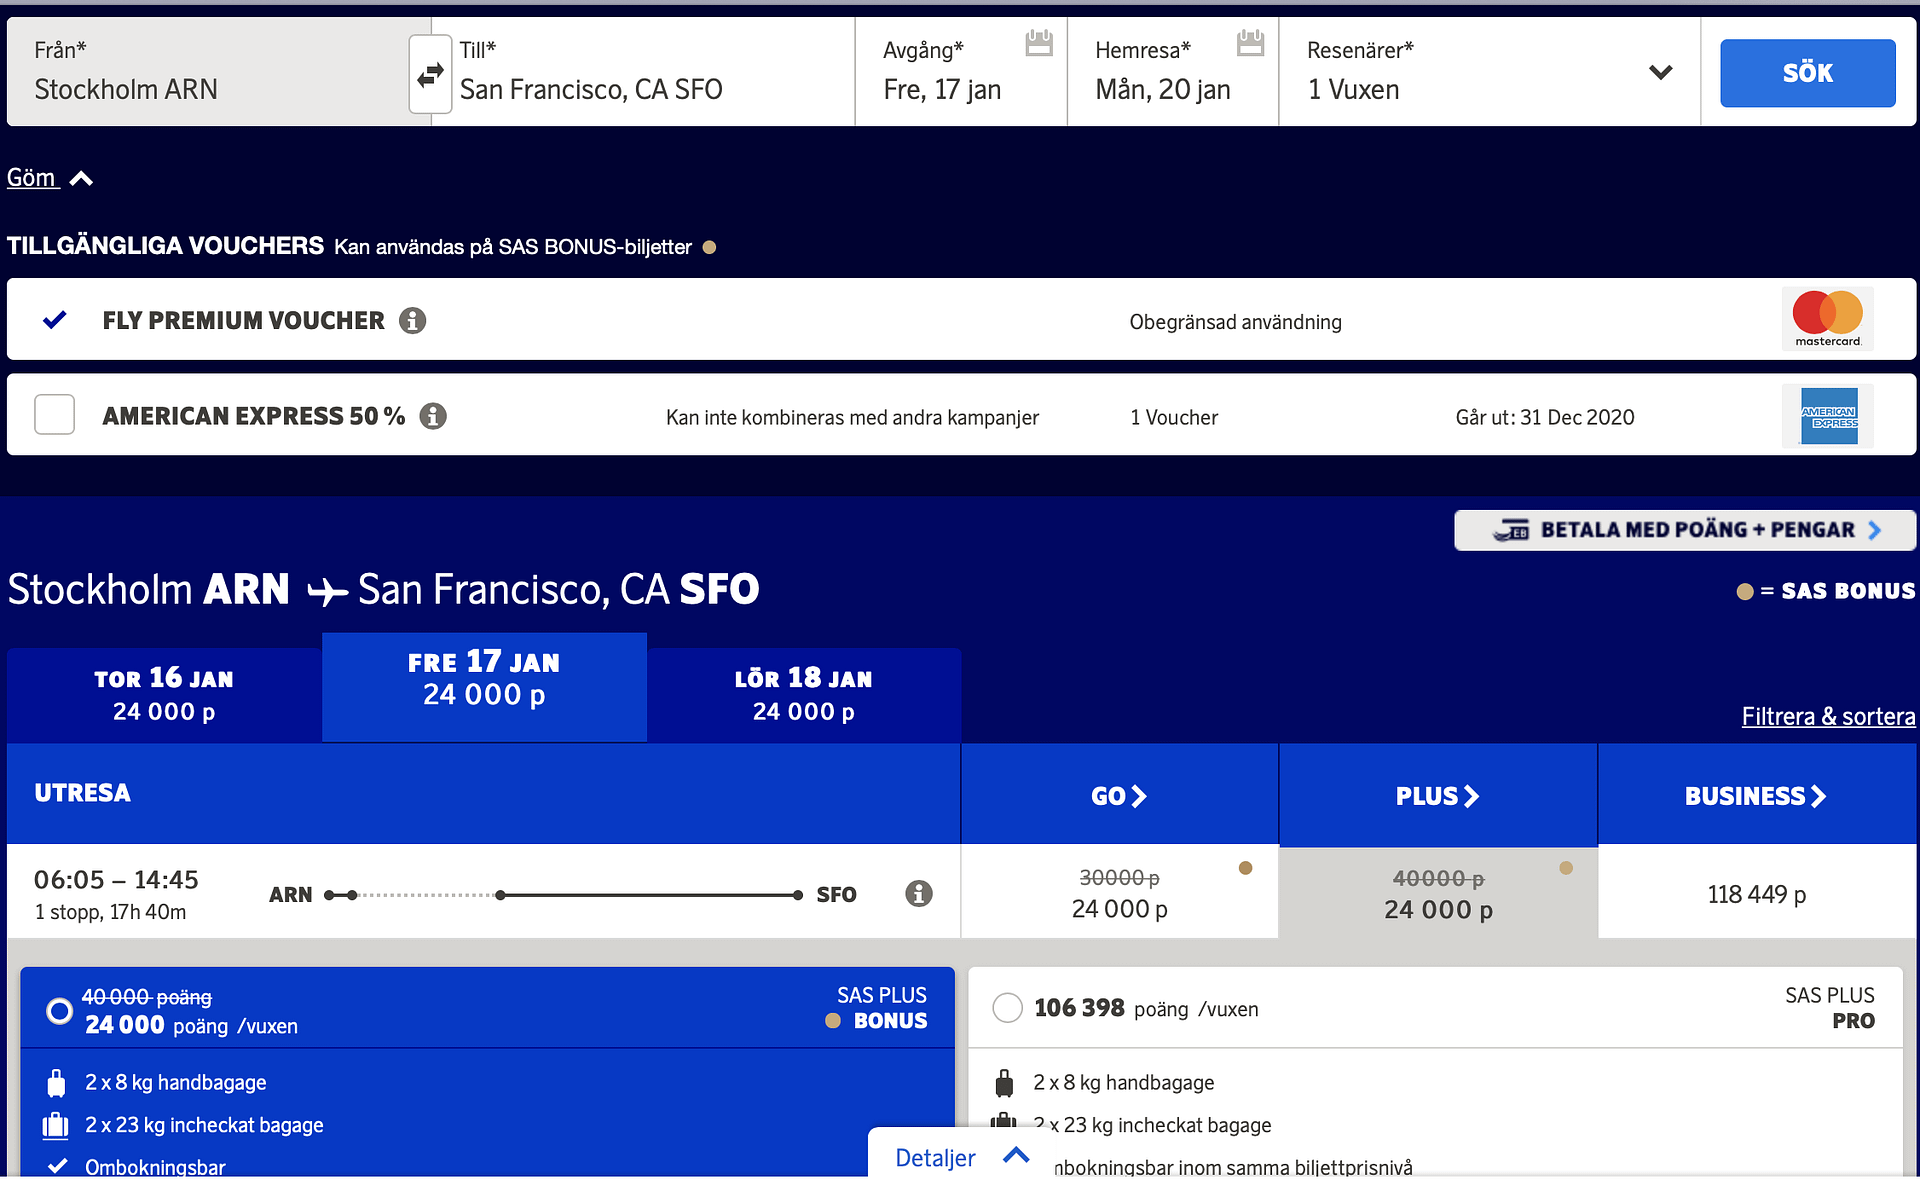 Fly SAS Plus round trip to the US and ASIA for 48.000 points, the same price as SAS Go, using a Fly Premium voucher combined with the actual promo.